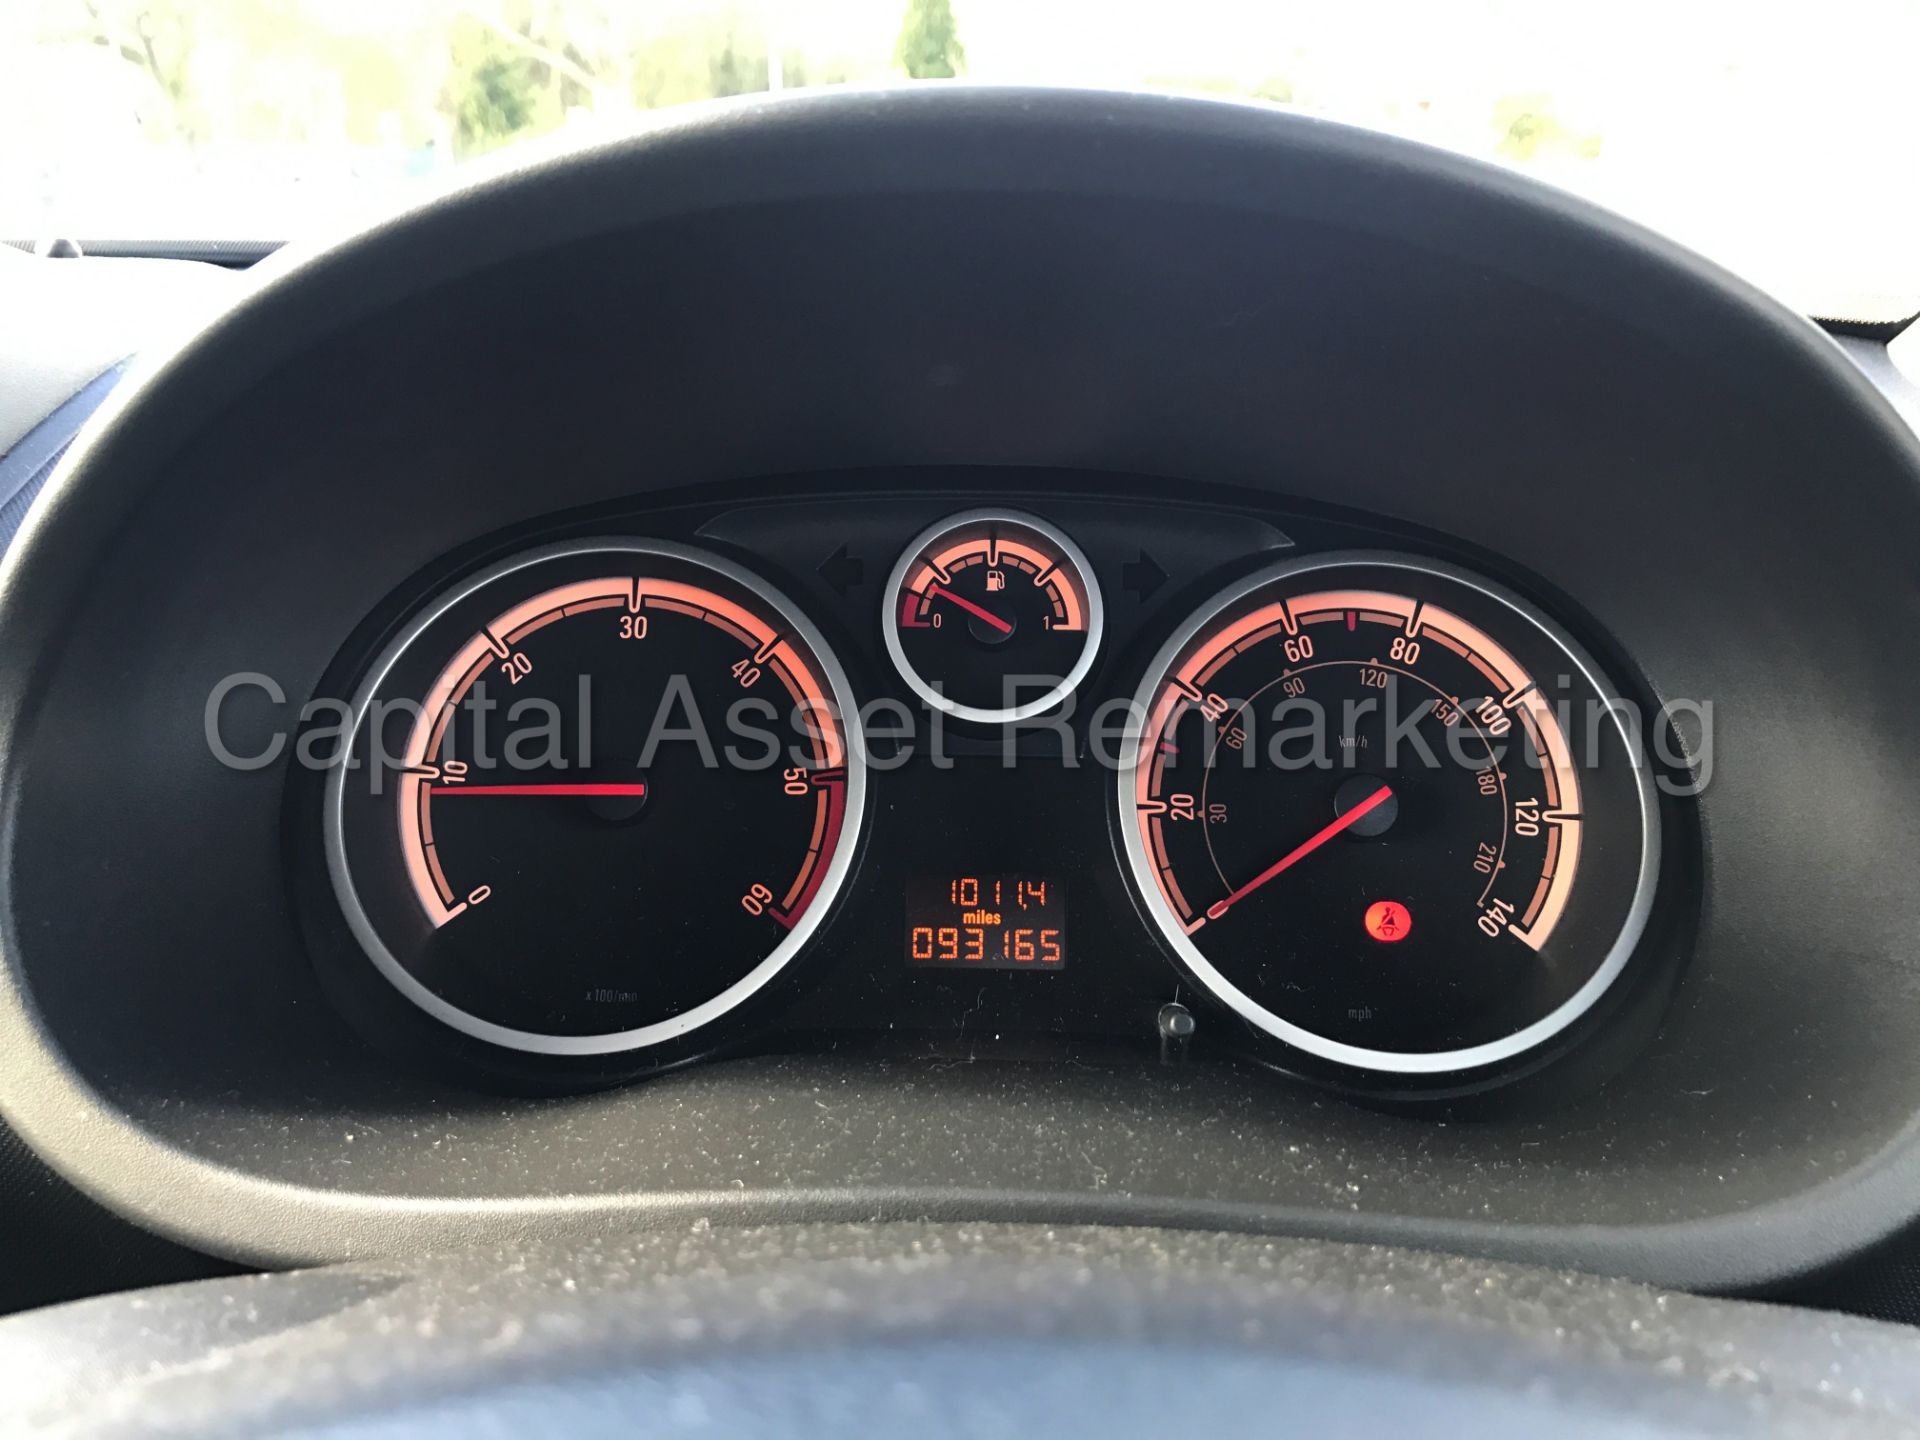 ON SALE VAUXHALL CORSA 'LIMITED EDITION' (2014) 'CDTI - 5 SPEED - AIR CON - ELEC PACK' (1 OWNER - Image 25 of 25